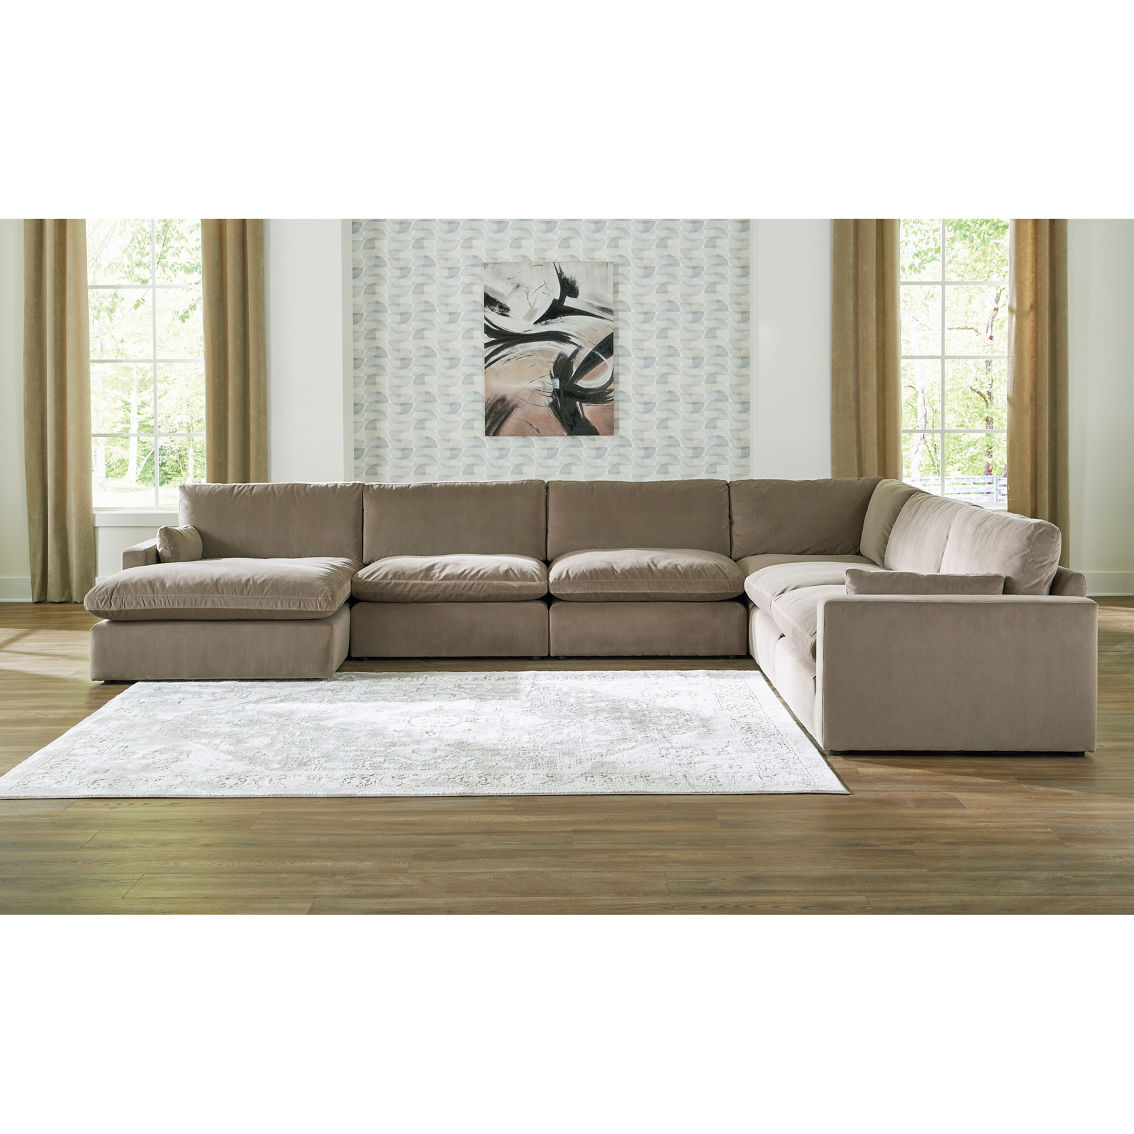 Signature Design by Ashley Sophie 6 pc. Sectional with Chaise - Image 2 of 2